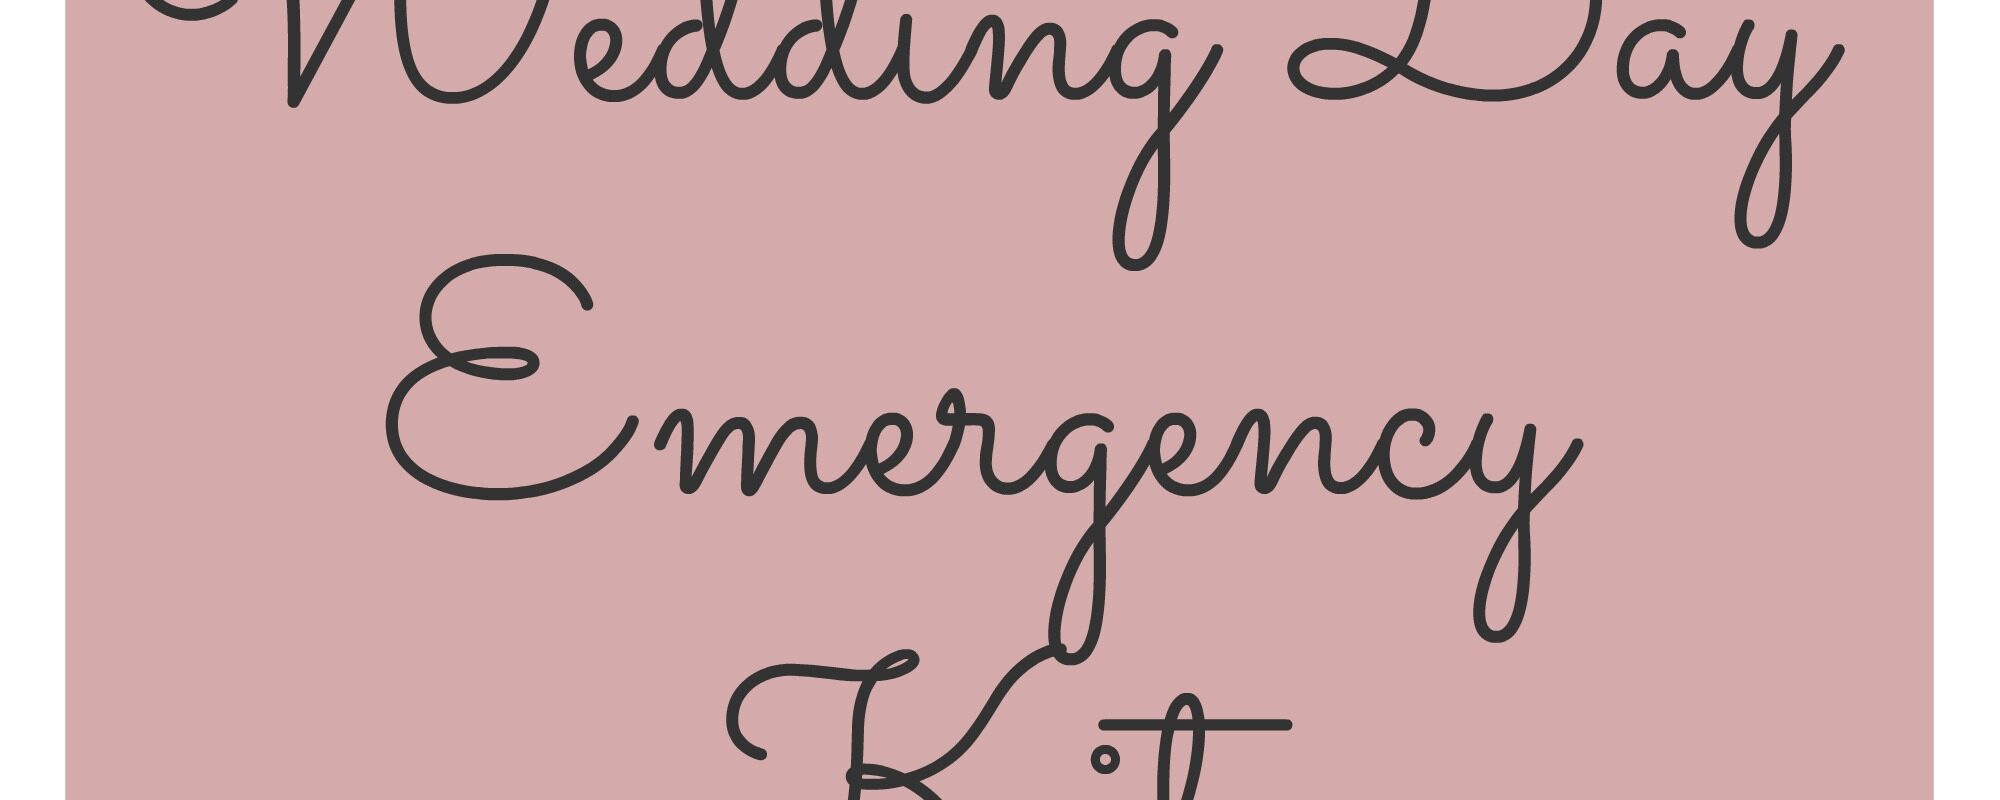 Wedding Day Emergency Kit List featured image